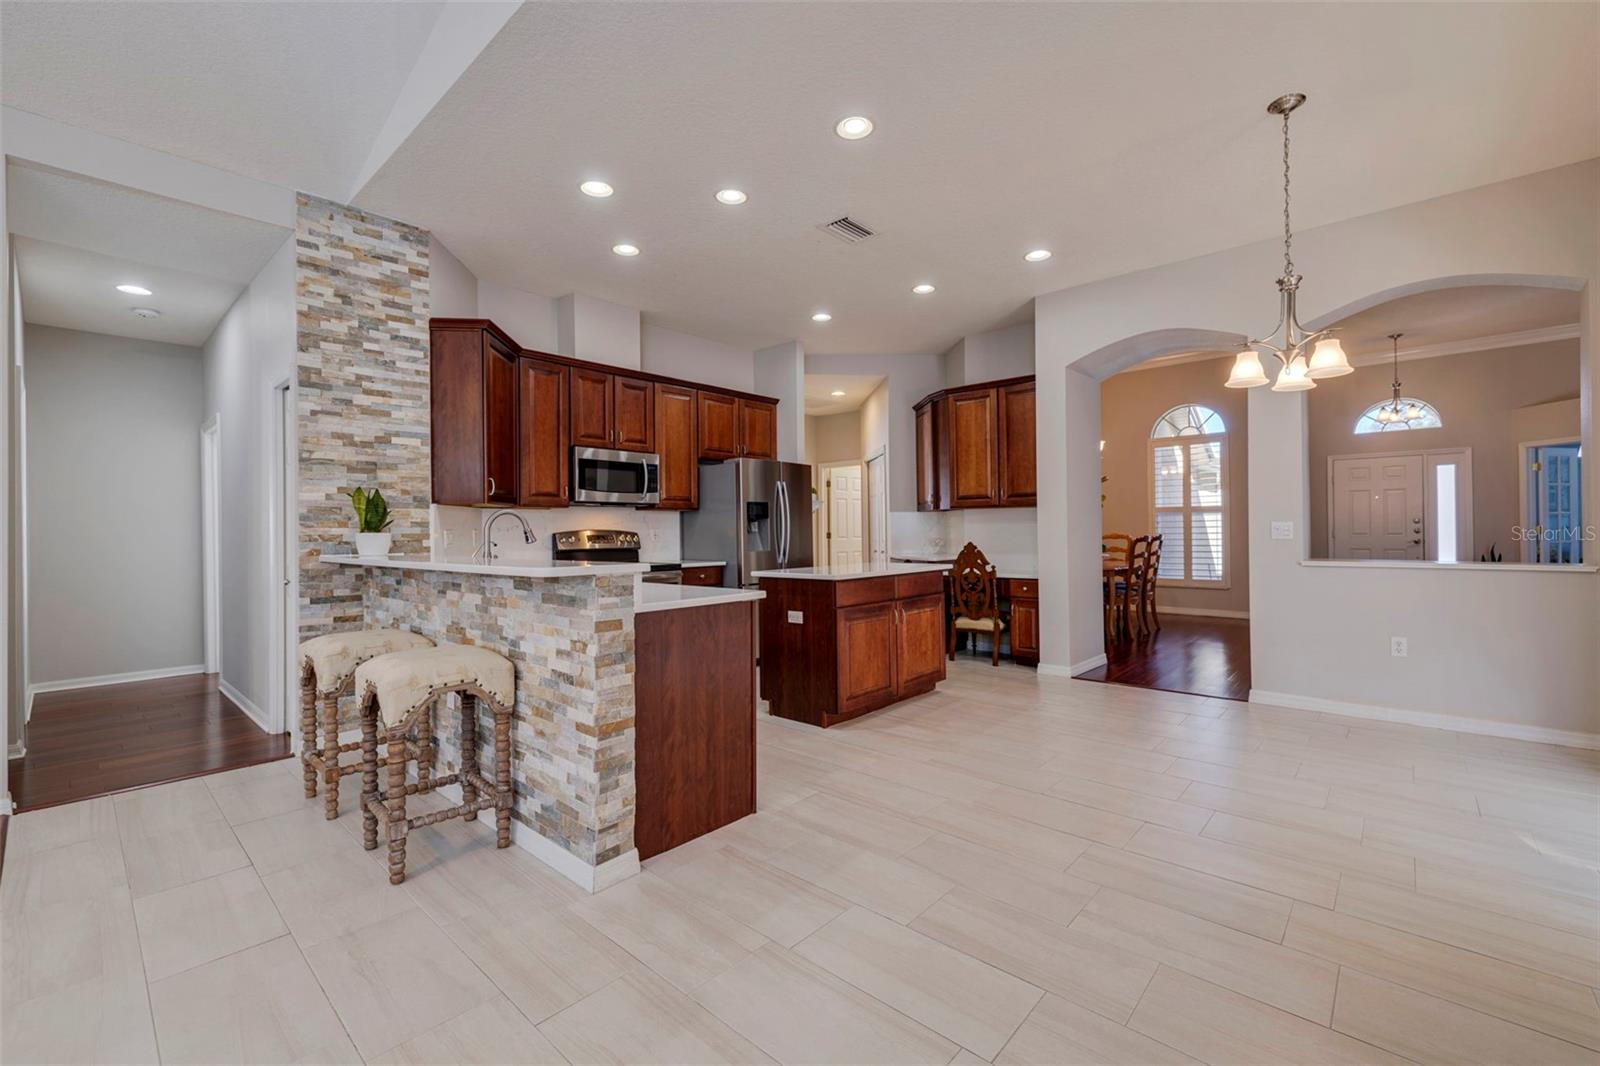 Kitchen - Stacked Stone Accent Wall, Breakfast Bar Seating, Quartz Countertops, Solid Wood Cabinetry, Stainless Steel Appliances, Center Island